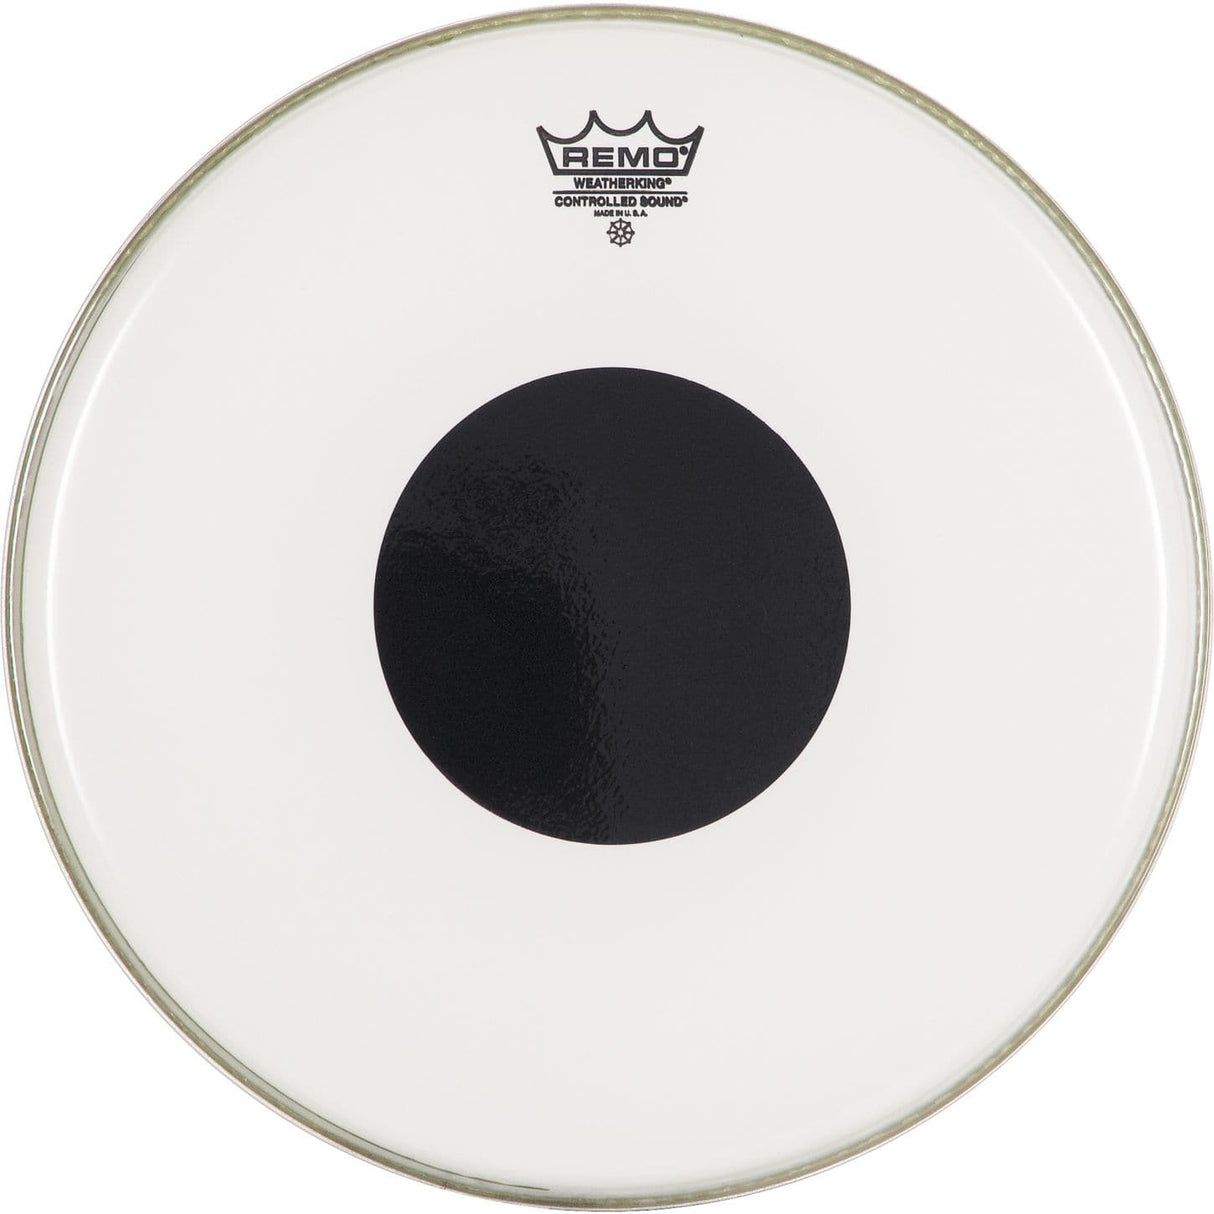 Remo Clear Controlled Sound 6 Inch Drum Head w/ Black Dot On Top